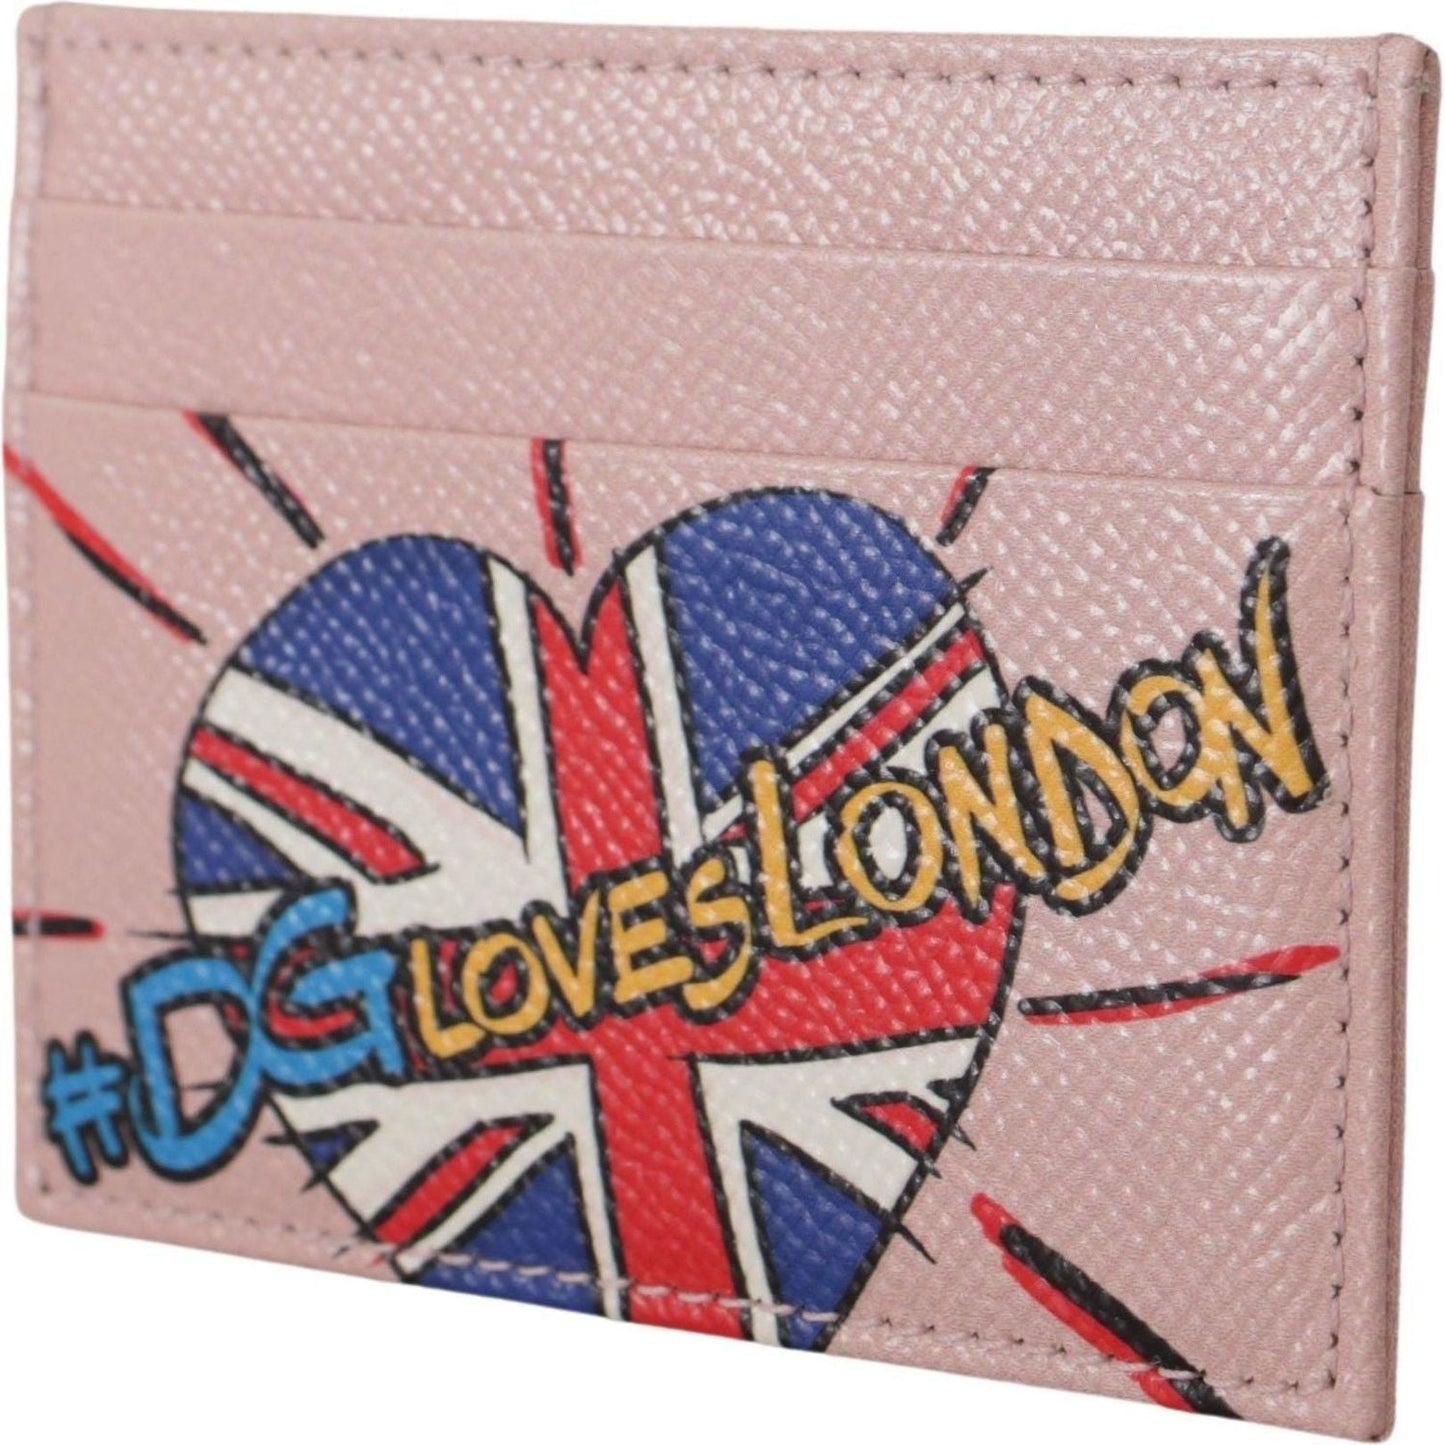 Dolce & Gabbana Chic Pink Leather Cardholder with Exclusive Print pink-leather-dgloveslondon-women-cardholder-case-wallet-1